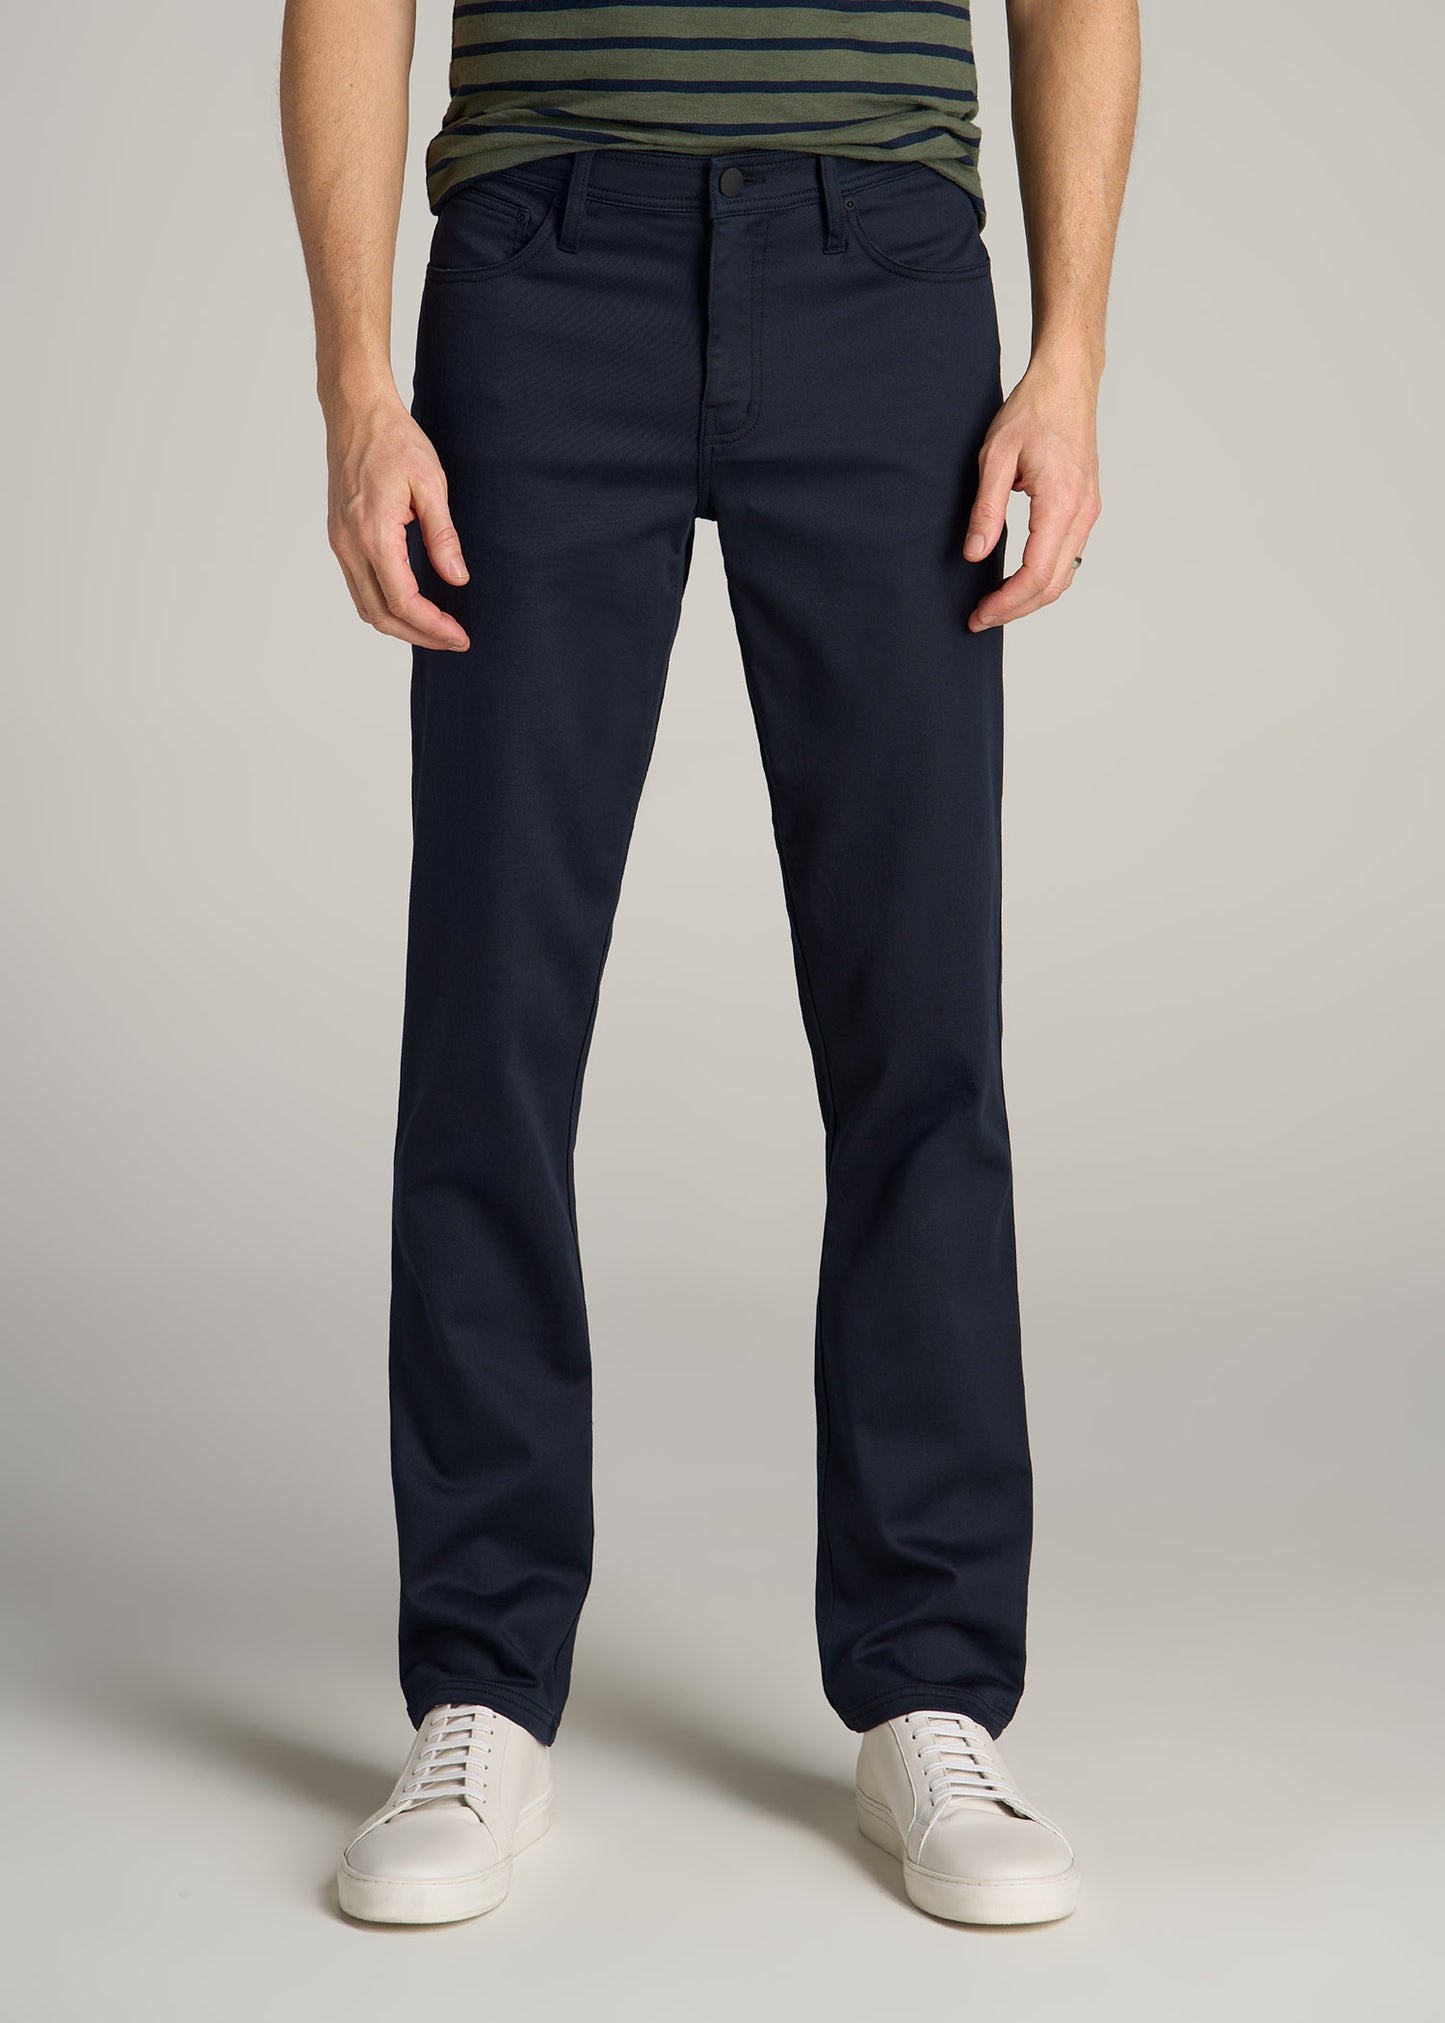 Everyday Comfort 5-Pocket TAPERED-FIT Pant for Tall Men in True Navy